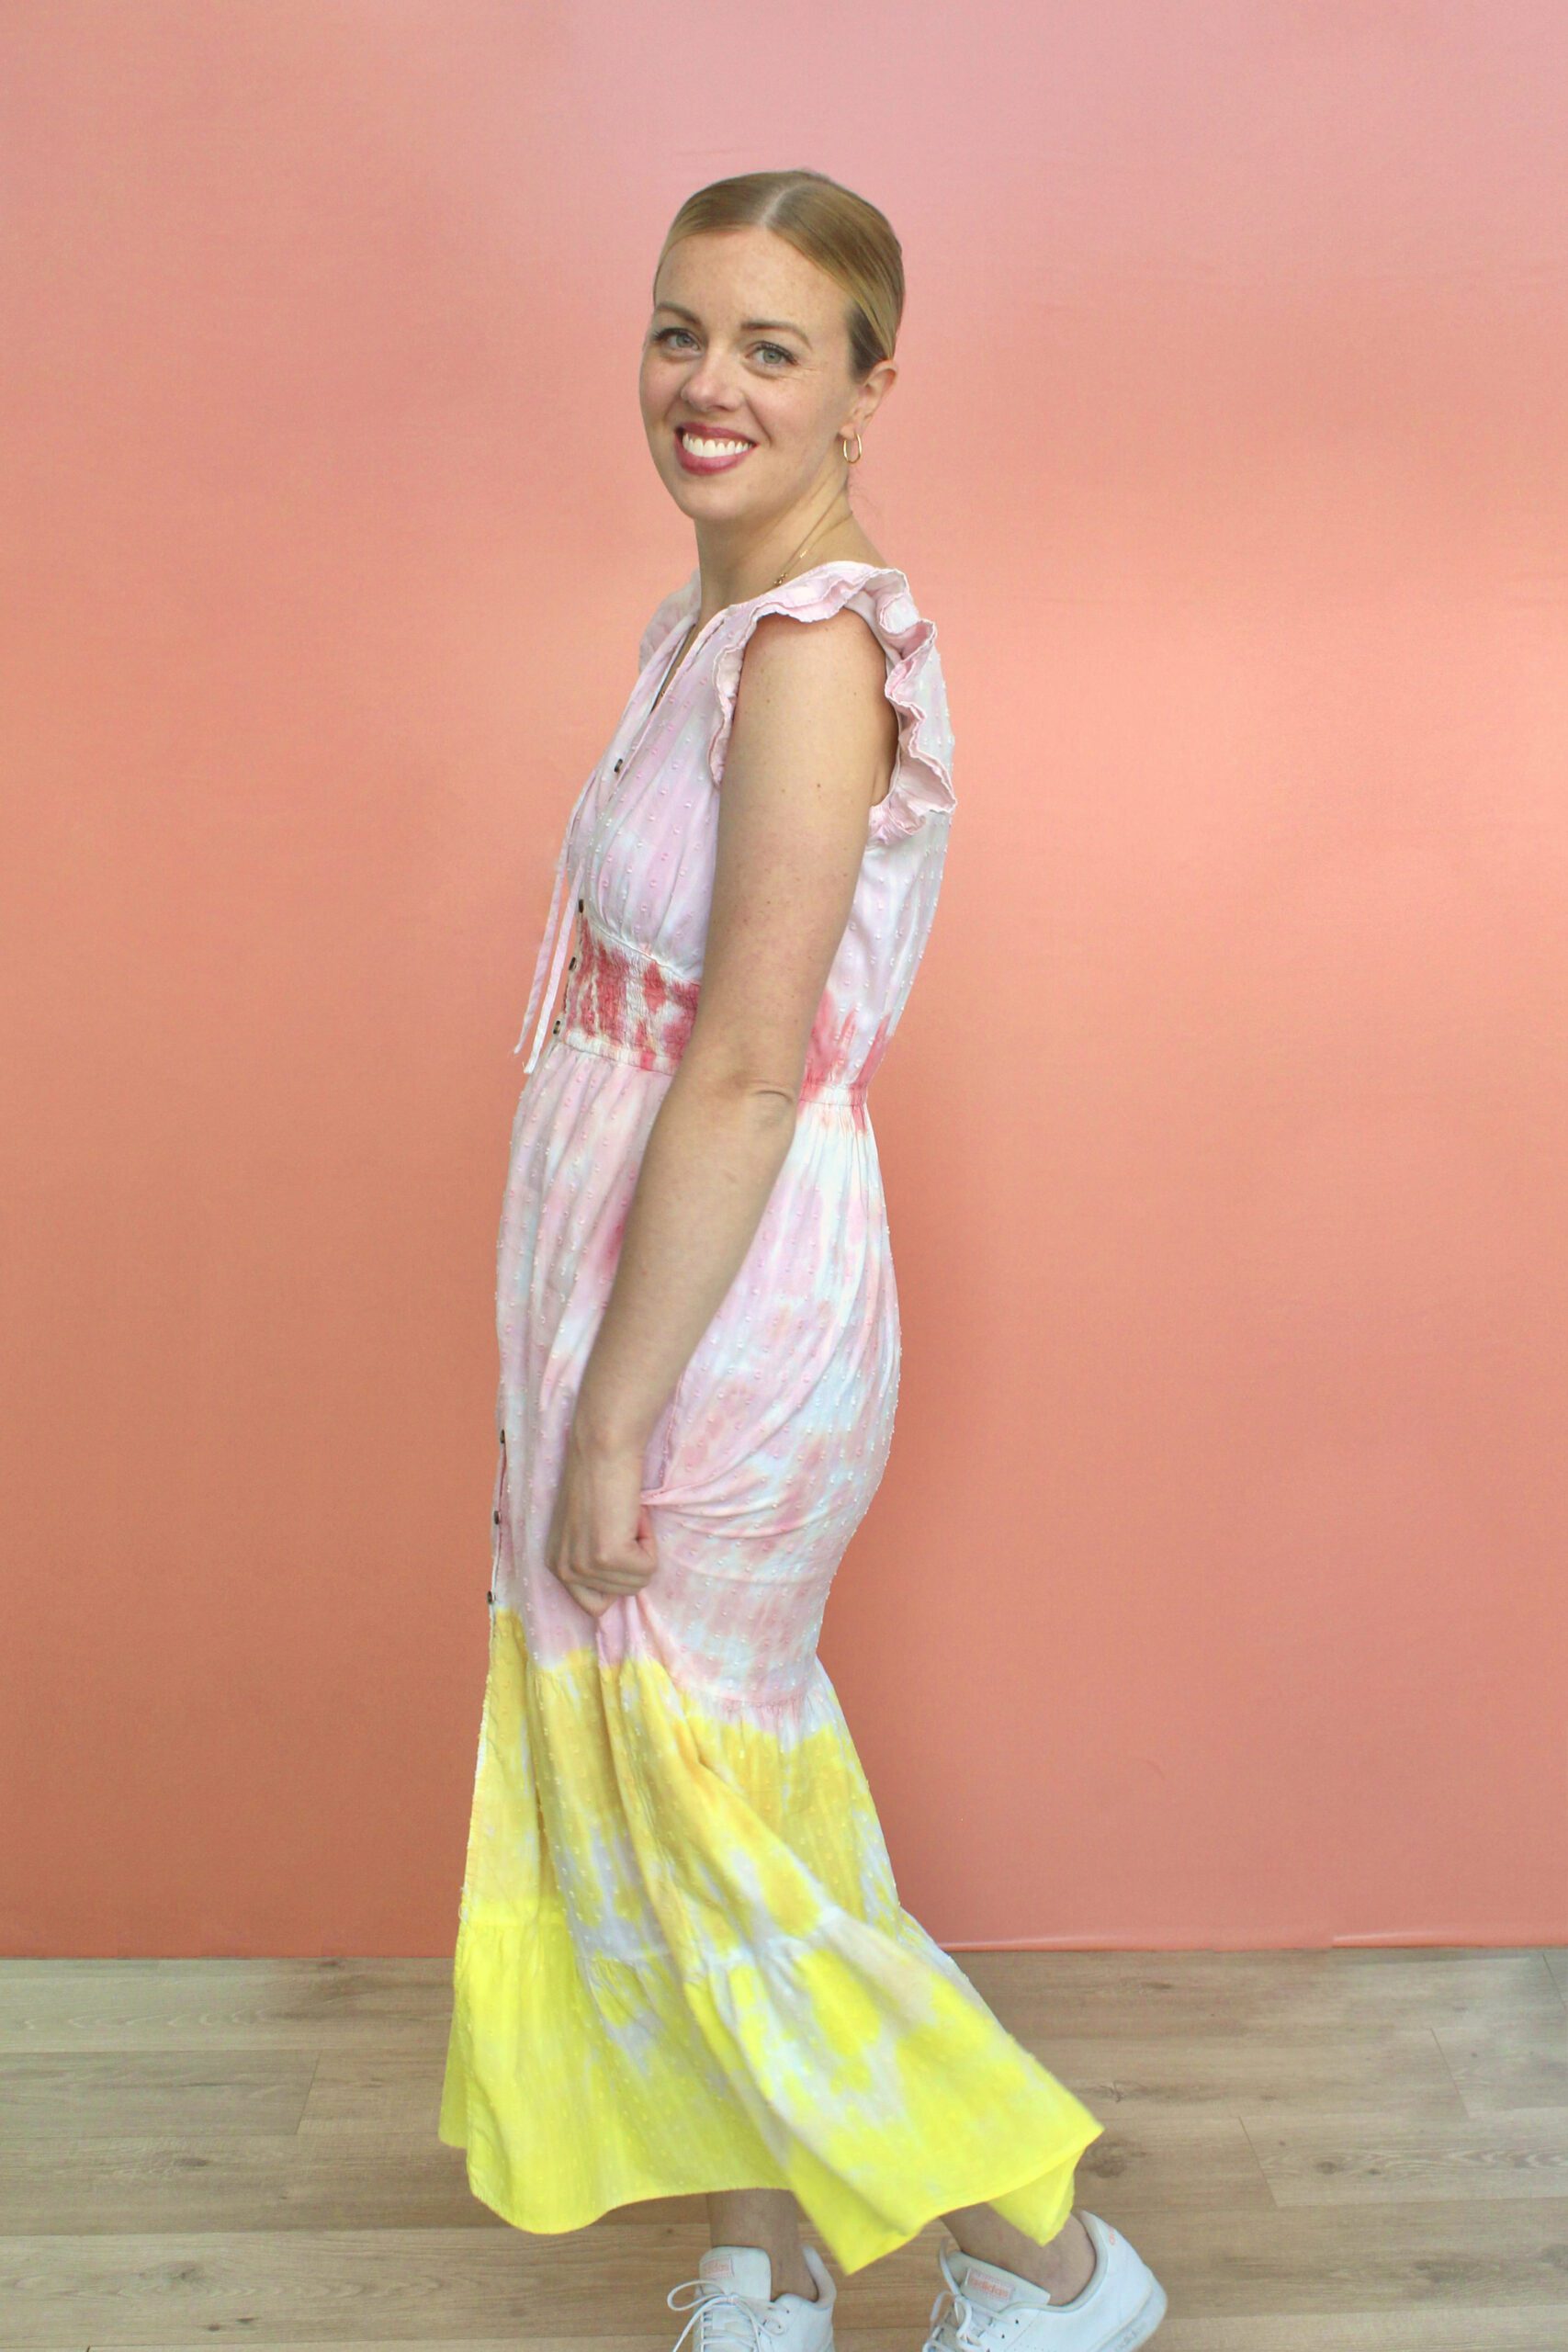 Take a Tie-Dye Dress for a Whirl This Summer